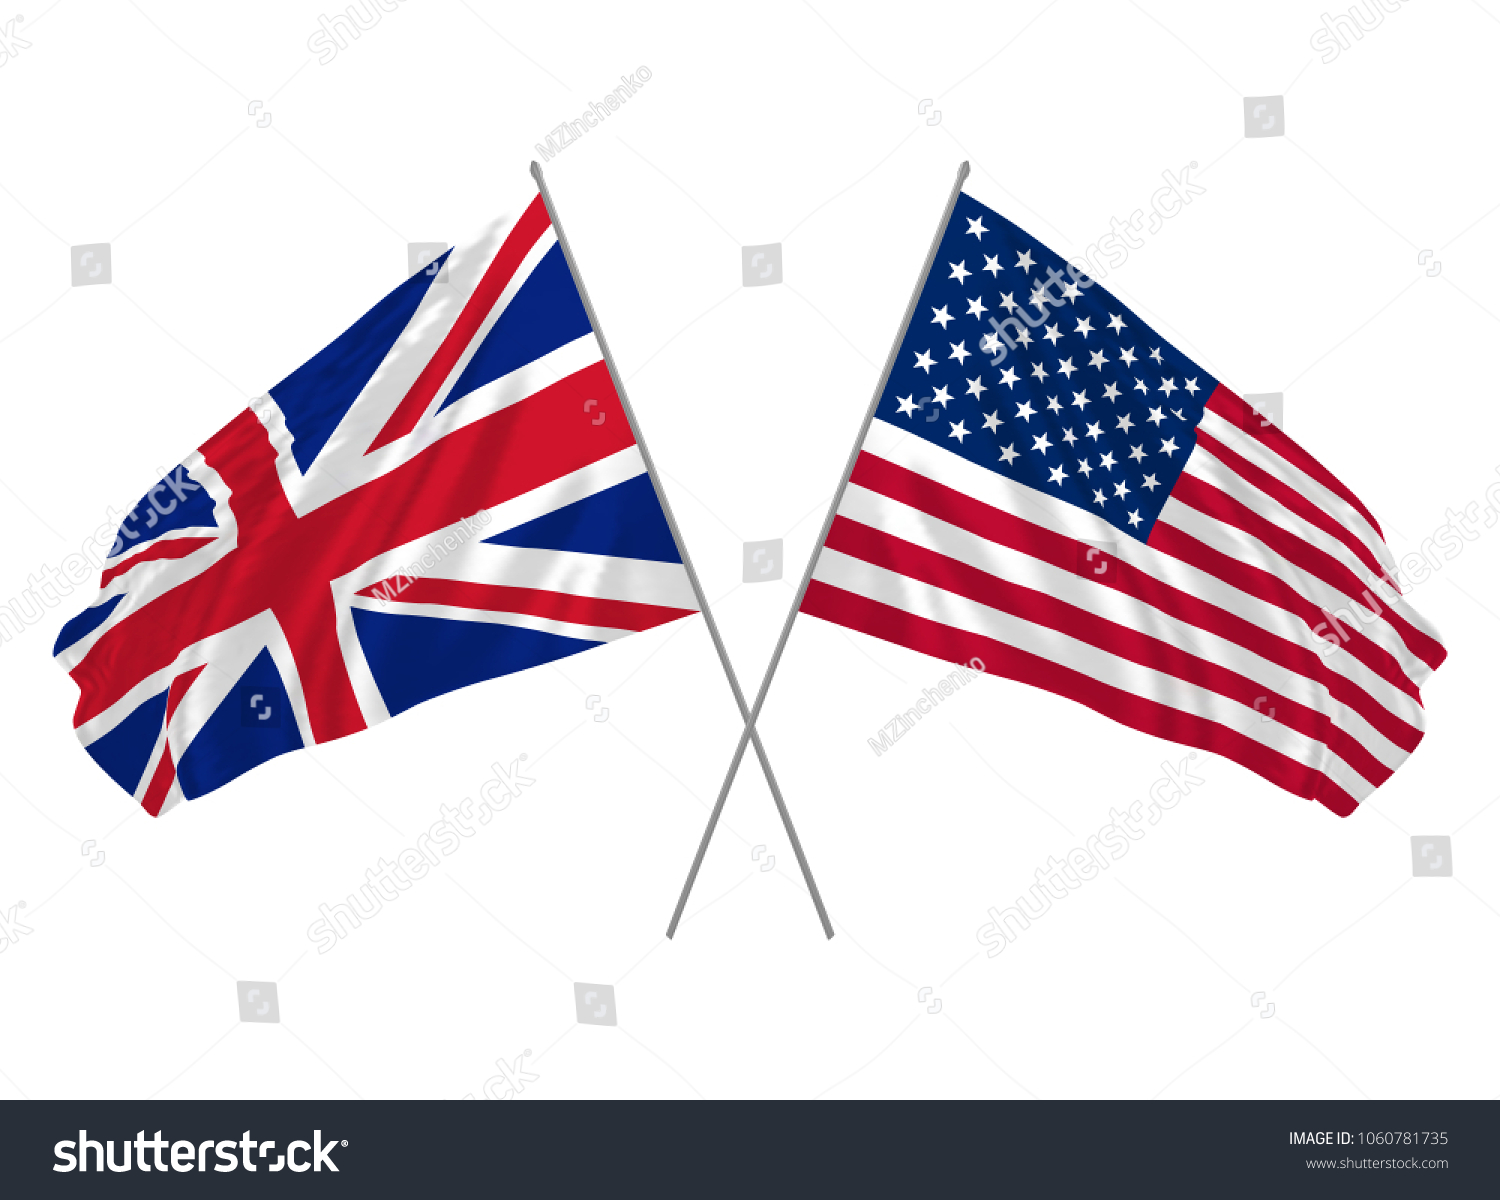 SVG of USA and UK crossed flags waving in the wind as sign of cooperation or sport competition or diplomatic meeting event. Vector illustration. svg